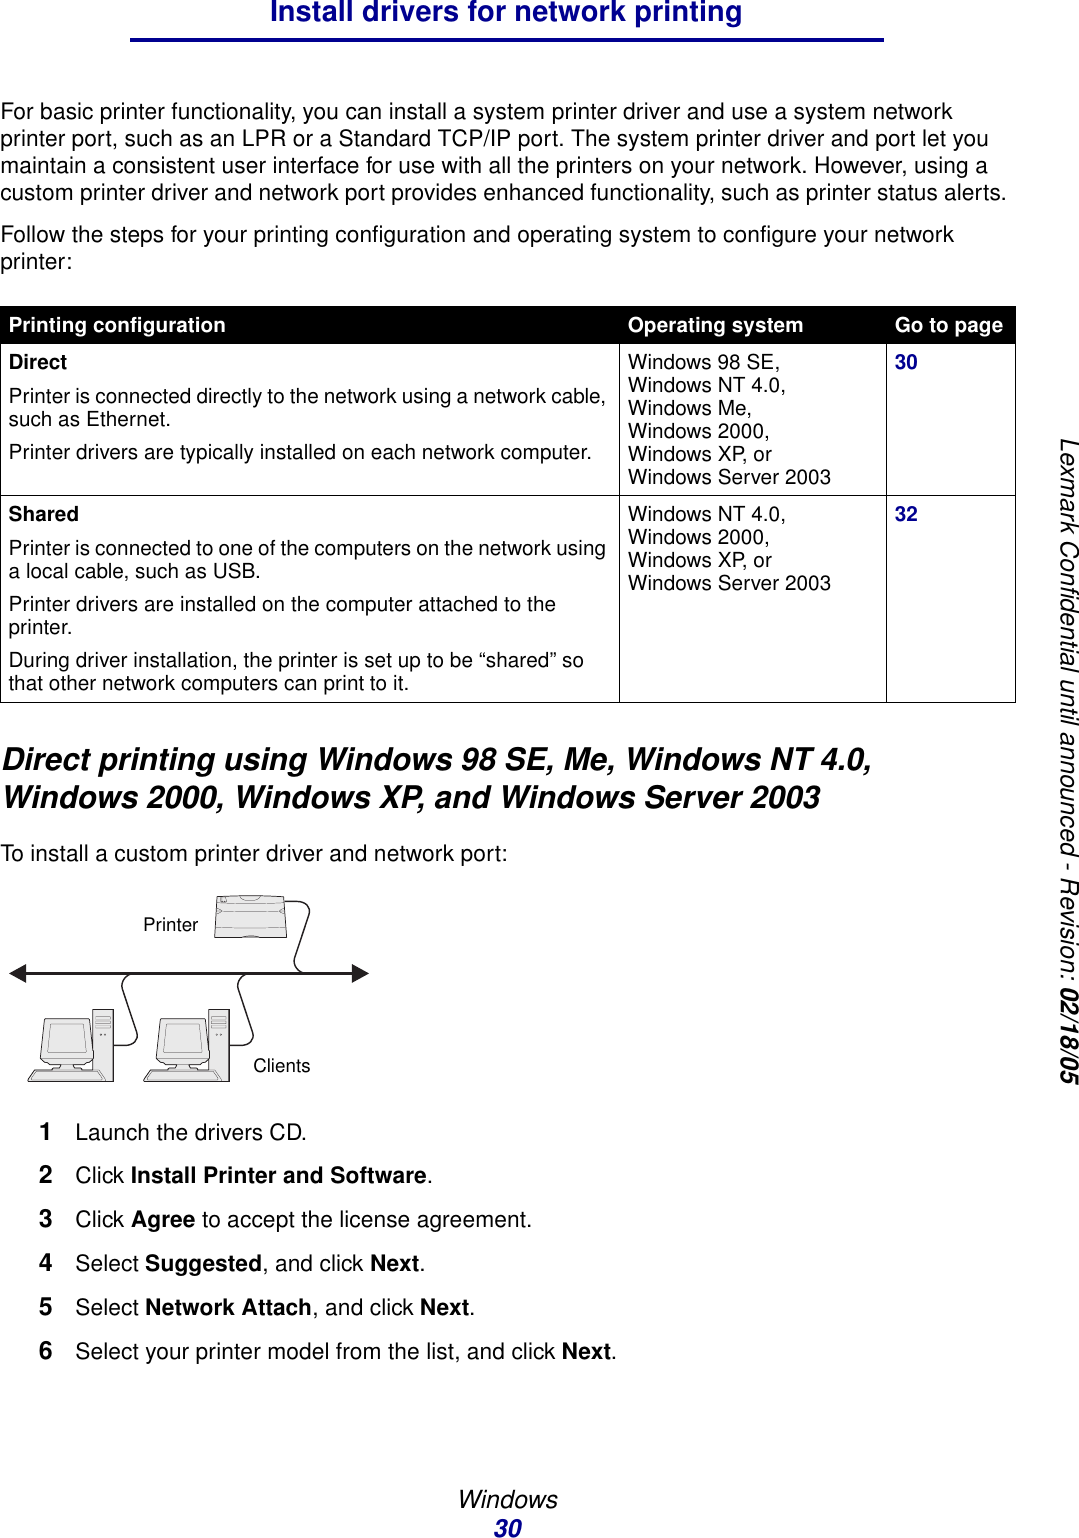 Windows30Install drivers for network printingLexmark Confidential until announced - Revision: 02/18/05For basic printer functionality, you can install a system printer driver and use a system network printer port, such as an LPR or a Standard TCP/IP port. The system printer driver and port let you maintain a consistent user interface for use with all the printers on your network. However, using a custom printer driver and network port provides enhanced functionality, such as printer status alerts. Follow the steps for your printing configuration and operating system to configure your network printer:Direct printing using Windows 98 SE, Me, Windows NT 4.0, Windows 2000, Windows XP, and Windows Server 2003To install a custom printer driver and network port:1Launch the drivers CD.2Click Install Printer and Software.3Click Agree to accept the license agreement.4Select Suggested, and click Next.5Select Network Attach, and click Next.6Select your printer model from the list, and click Next.Printing configuration Operating system Go to pageDirectPrinter is connected directly to the network using a network cable, such as Ethernet.Printer drivers are typically installed on each network computer.Windows 98 SE, Windows NT 4.0, Windows Me, Windows 2000, Windows XP, or Windows Server 200330SharedPrinter is connected to one of the computers on the network using a local cable, such as USB.Printer drivers are installed on the computer attached to the printer.During driver installation, the printer is set up to be “shared” so that other network computers can print to it.Windows NT 4.0, Windows 2000, Windows XP, or Windows Server 200332PrinterClients